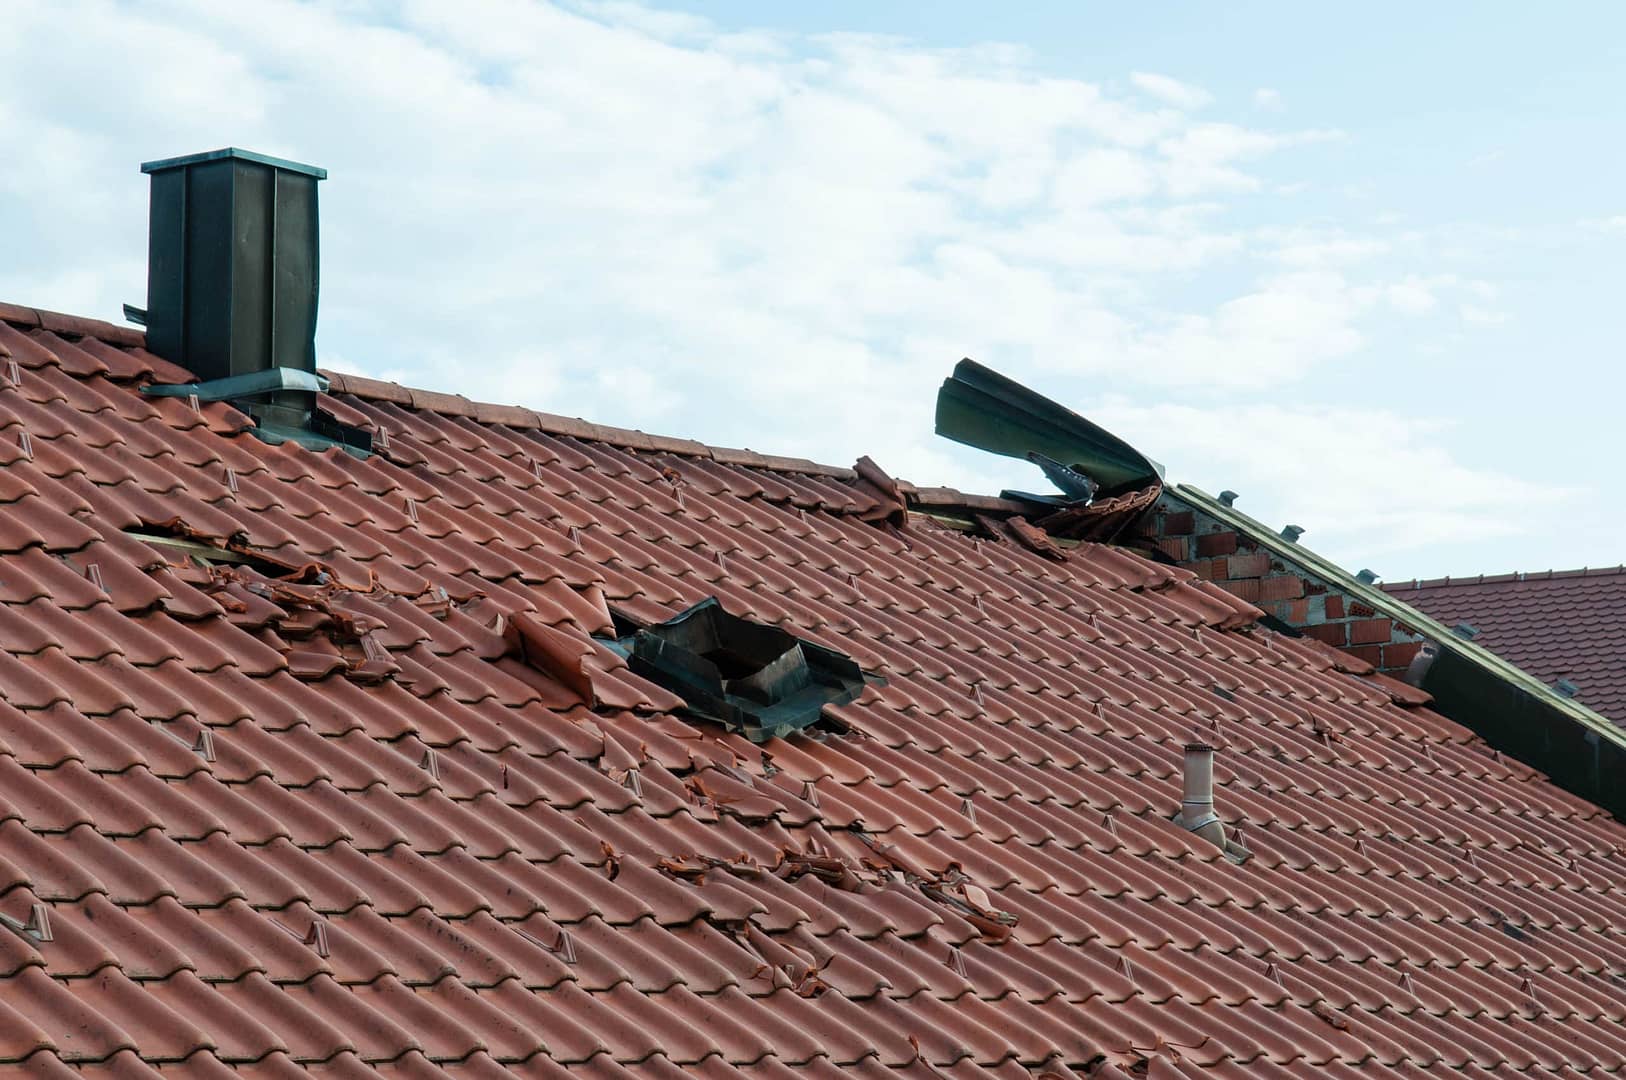 storm damage to clay tile roof